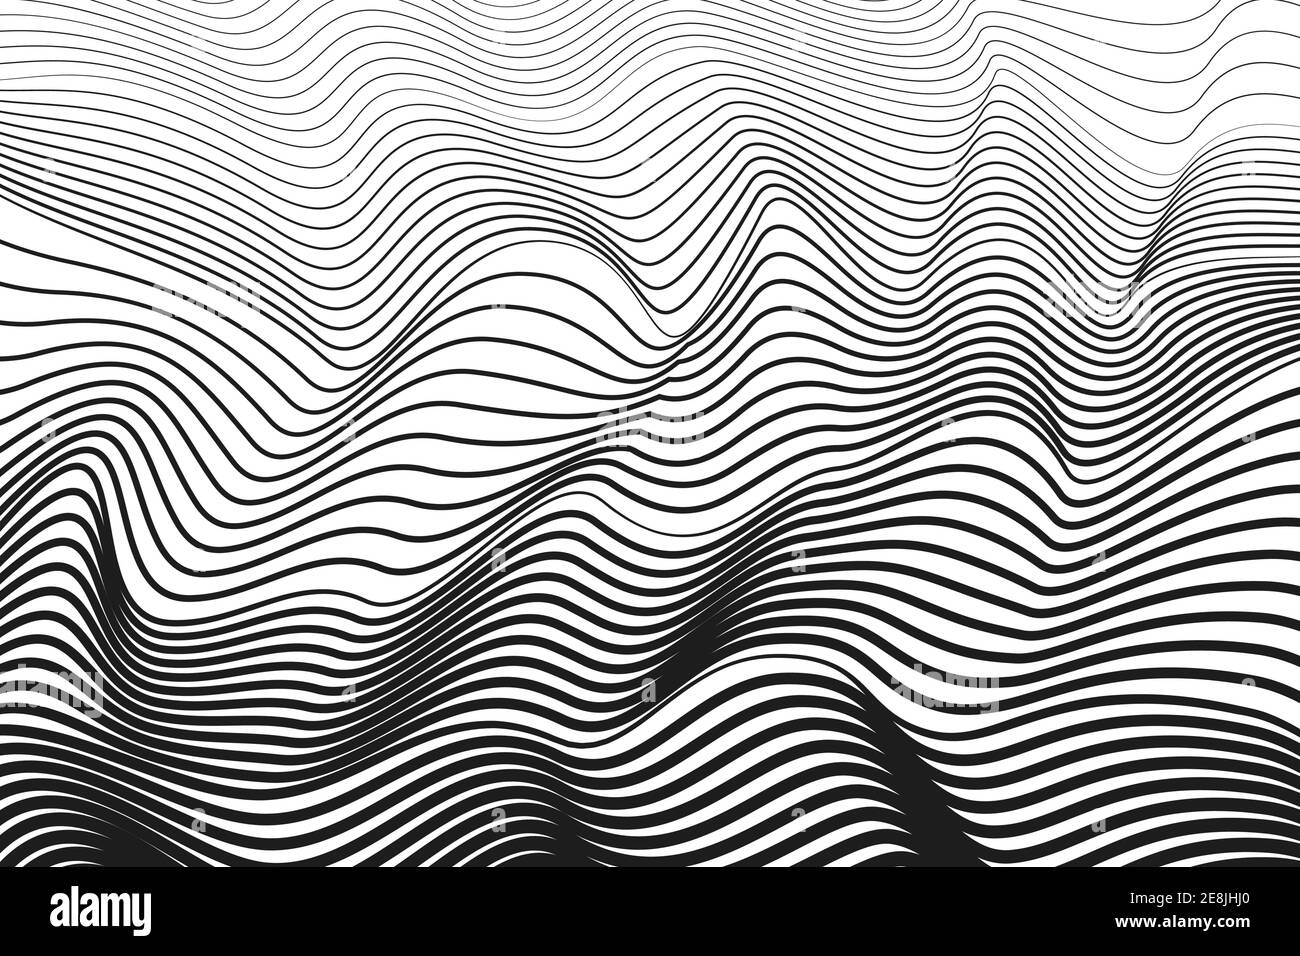 Black squiggle curves, white background. Abstract line art design. Vector  optical illusion. BW striped pattern. Radio, sound waves concept. EPS10 Stock Vector